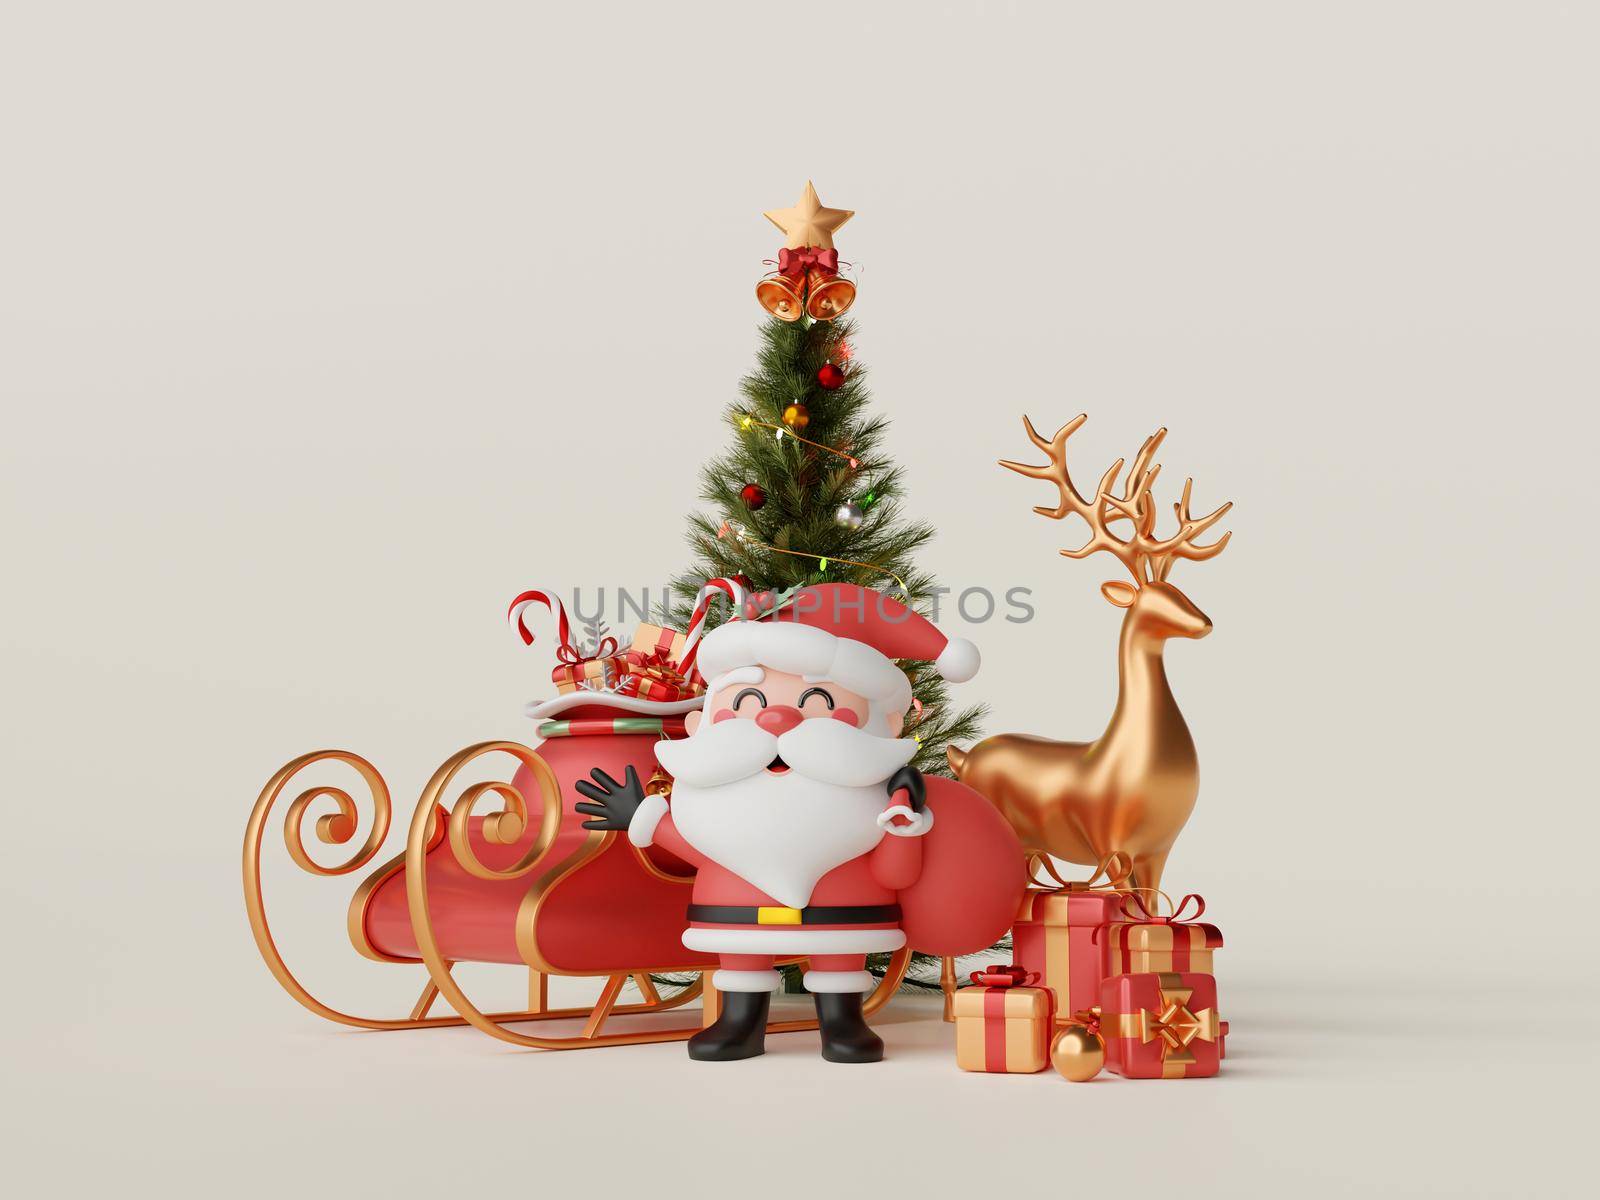 Christmas banner of Santa Claus with Christmas tree, gift box and reindeer, 3d illustration by nutzchotwarut